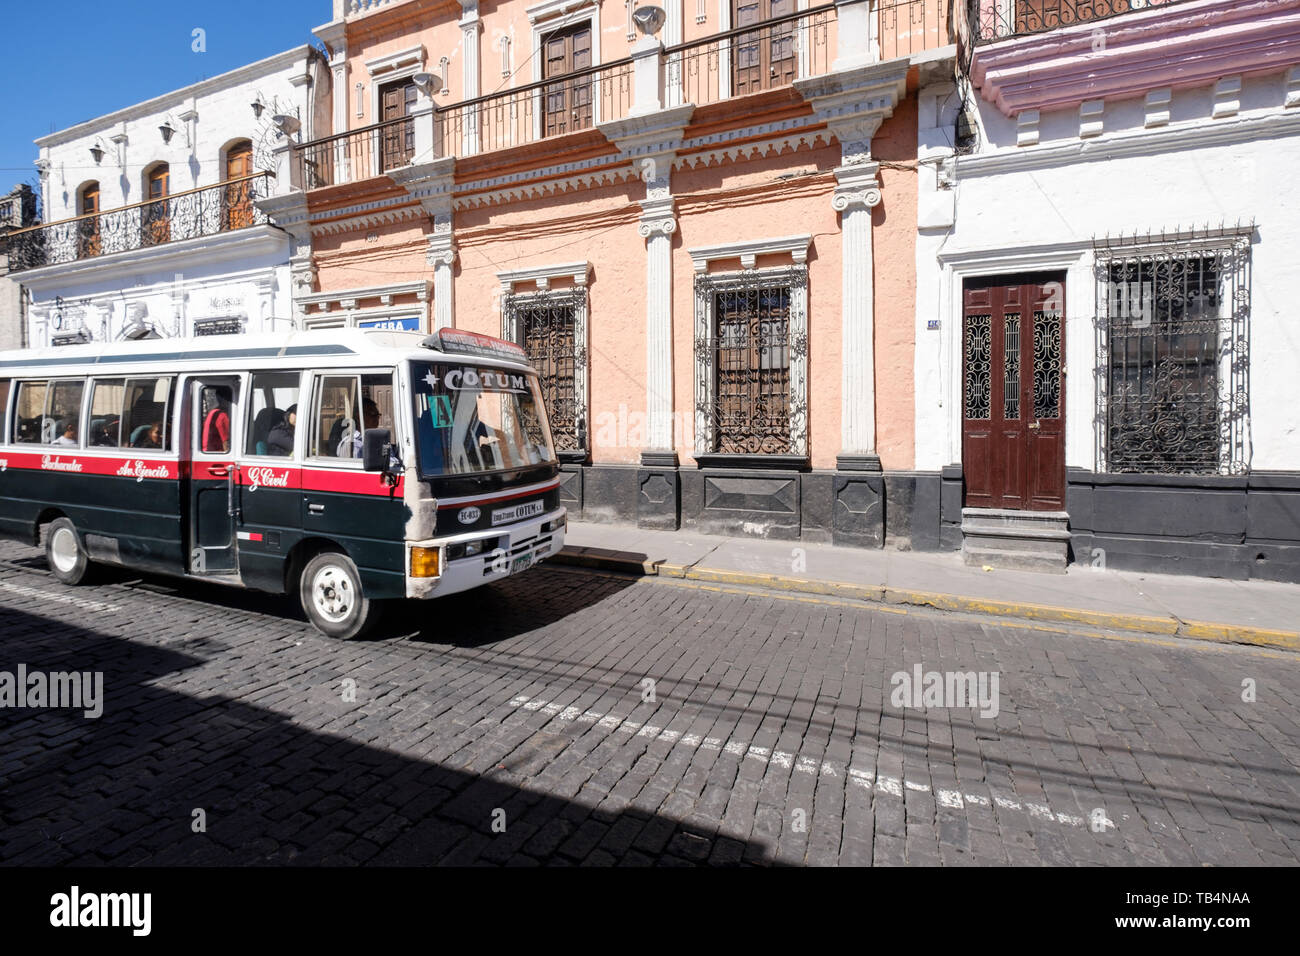 A public bus or colectivo on the streets of Arequipa, Peru Stock Photo